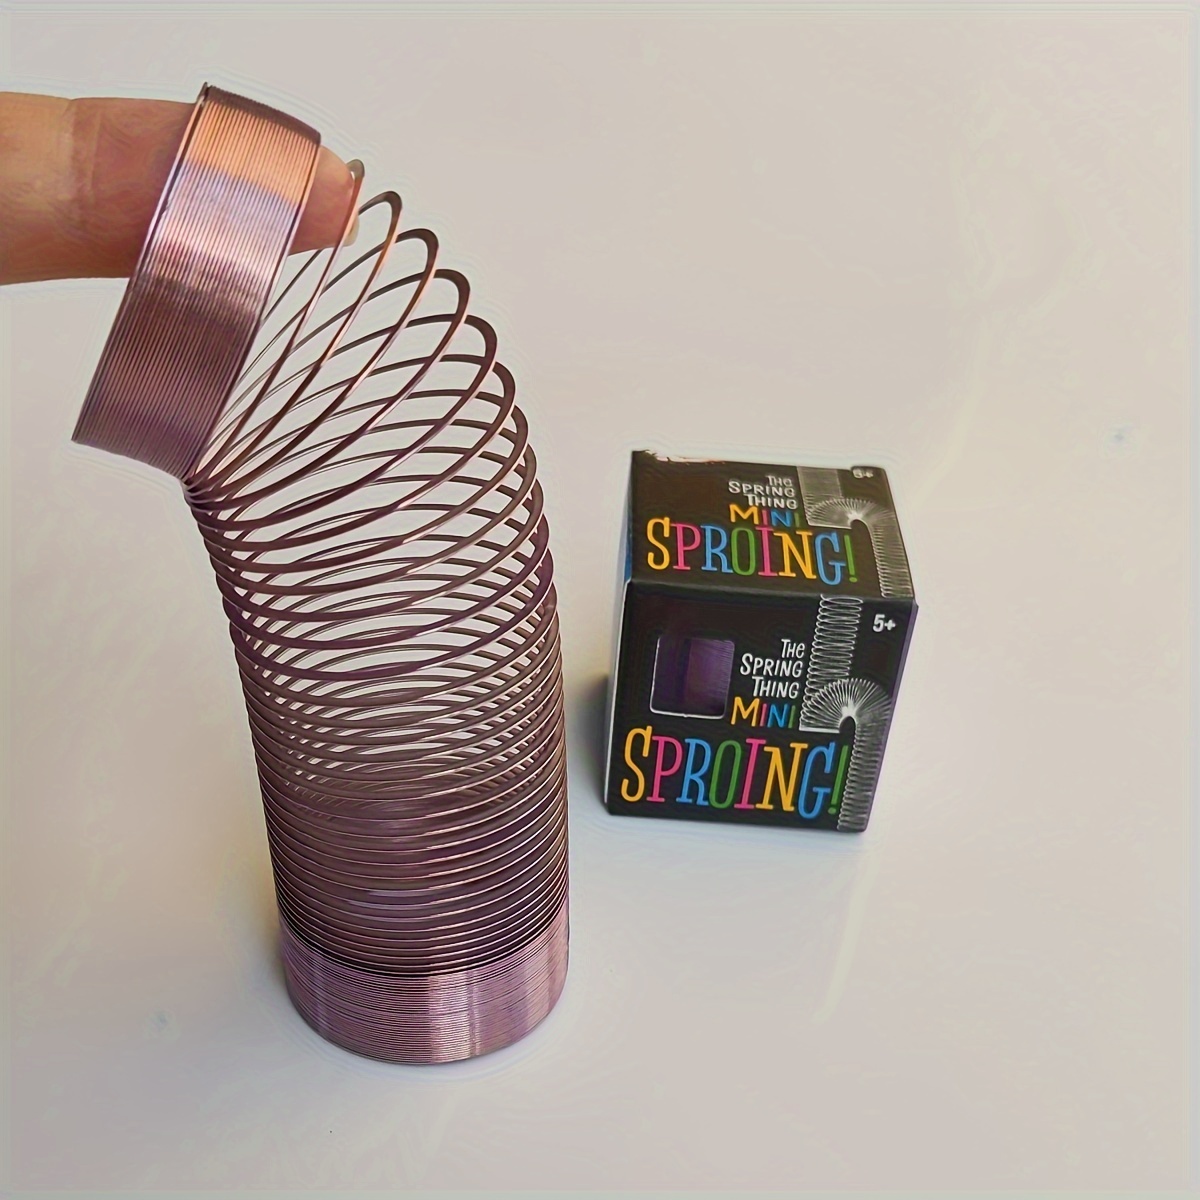 The World's Smallest Original Slinky Walking Spring Toy, Metal Slinky, Mini  Metal Springy, Fidget Toys, Party Favors, Halloween Christmas Gifts, Relea